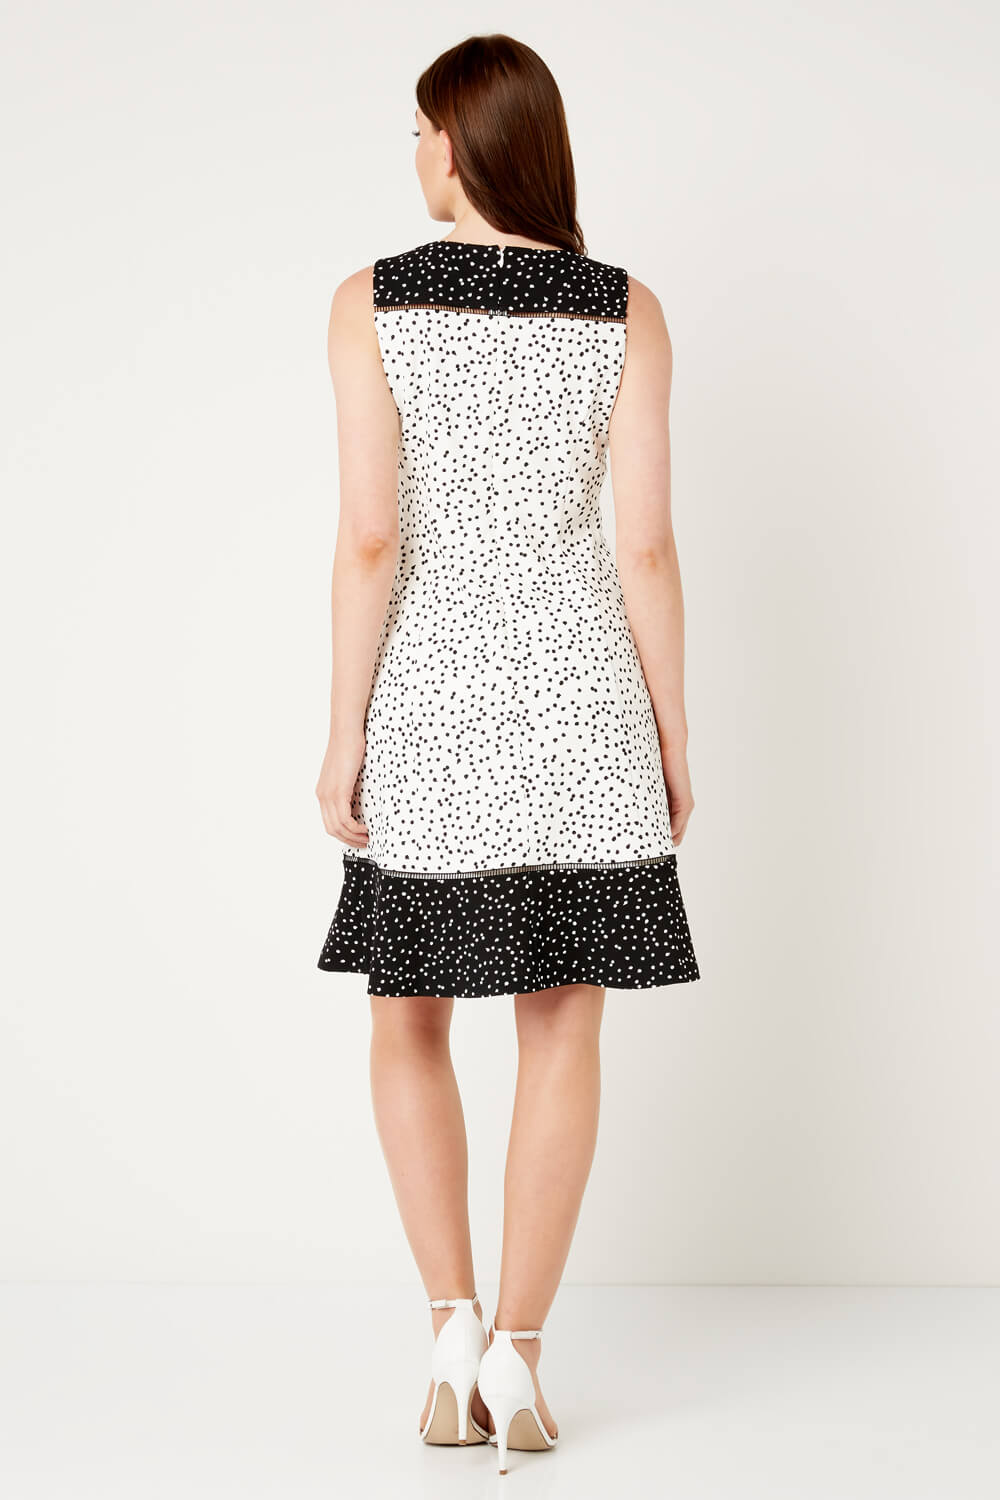 Ivory  Polka Dot Fit and Flare Dress, Image 2 of 3